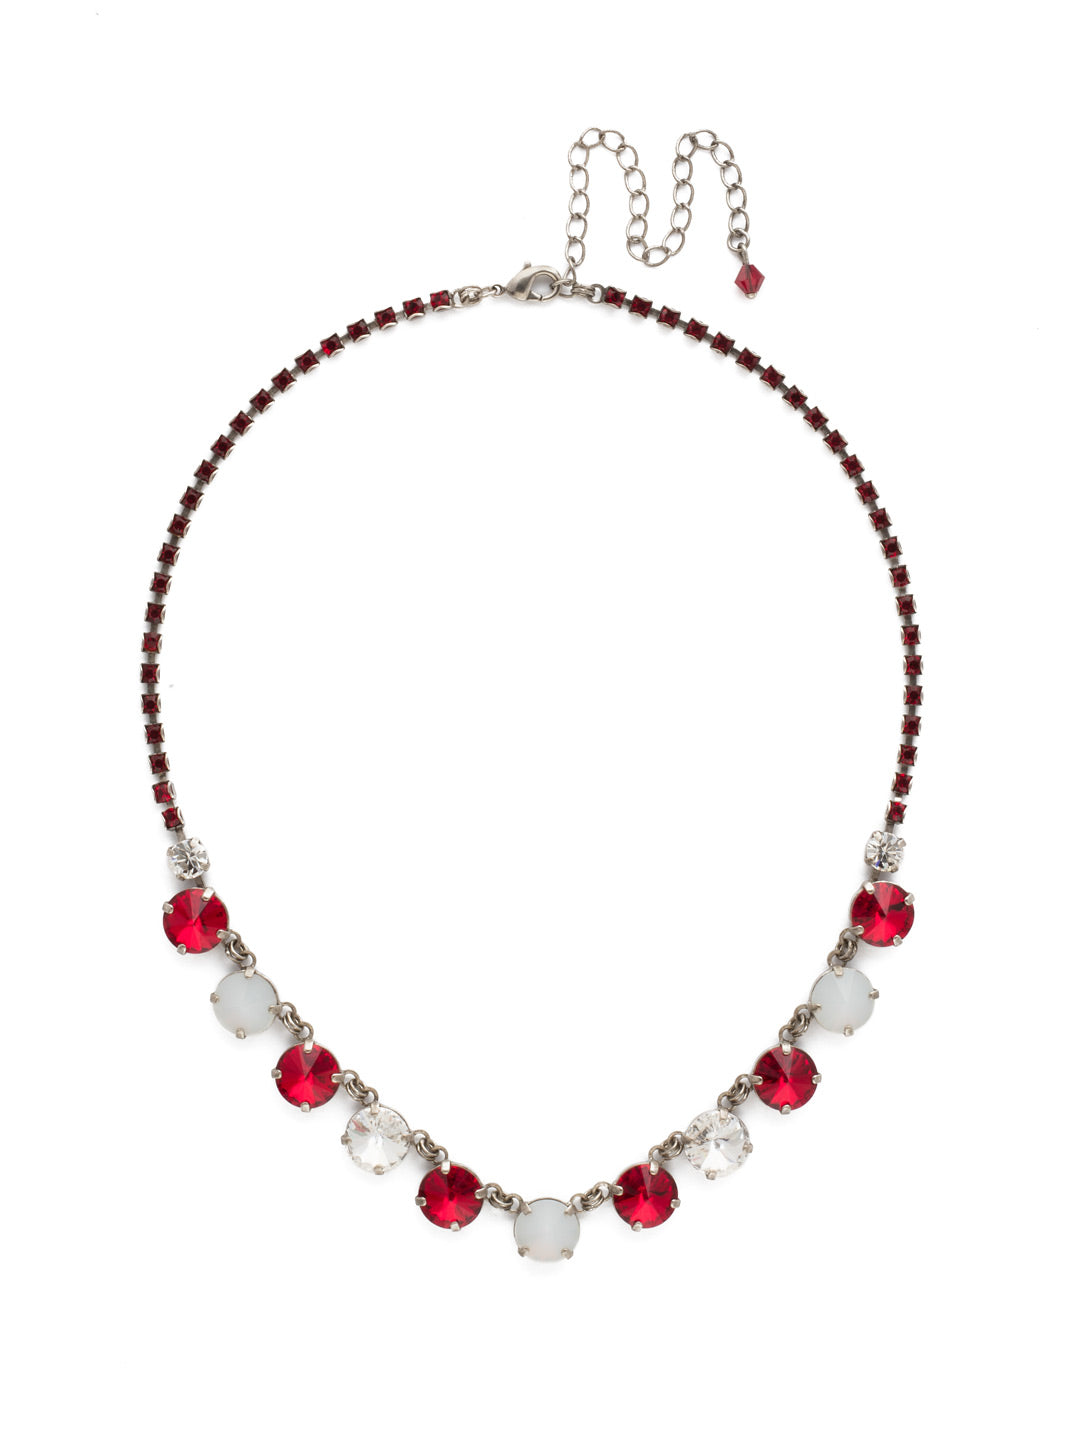 Simply Sophisticated Line Necklace - NDK6ASCP - A row of glamorous linked round crystals adds just the right touch of sparkle to any look. From Sorrelli's Crimson Pride collection in our Antique Silver-tone finish.